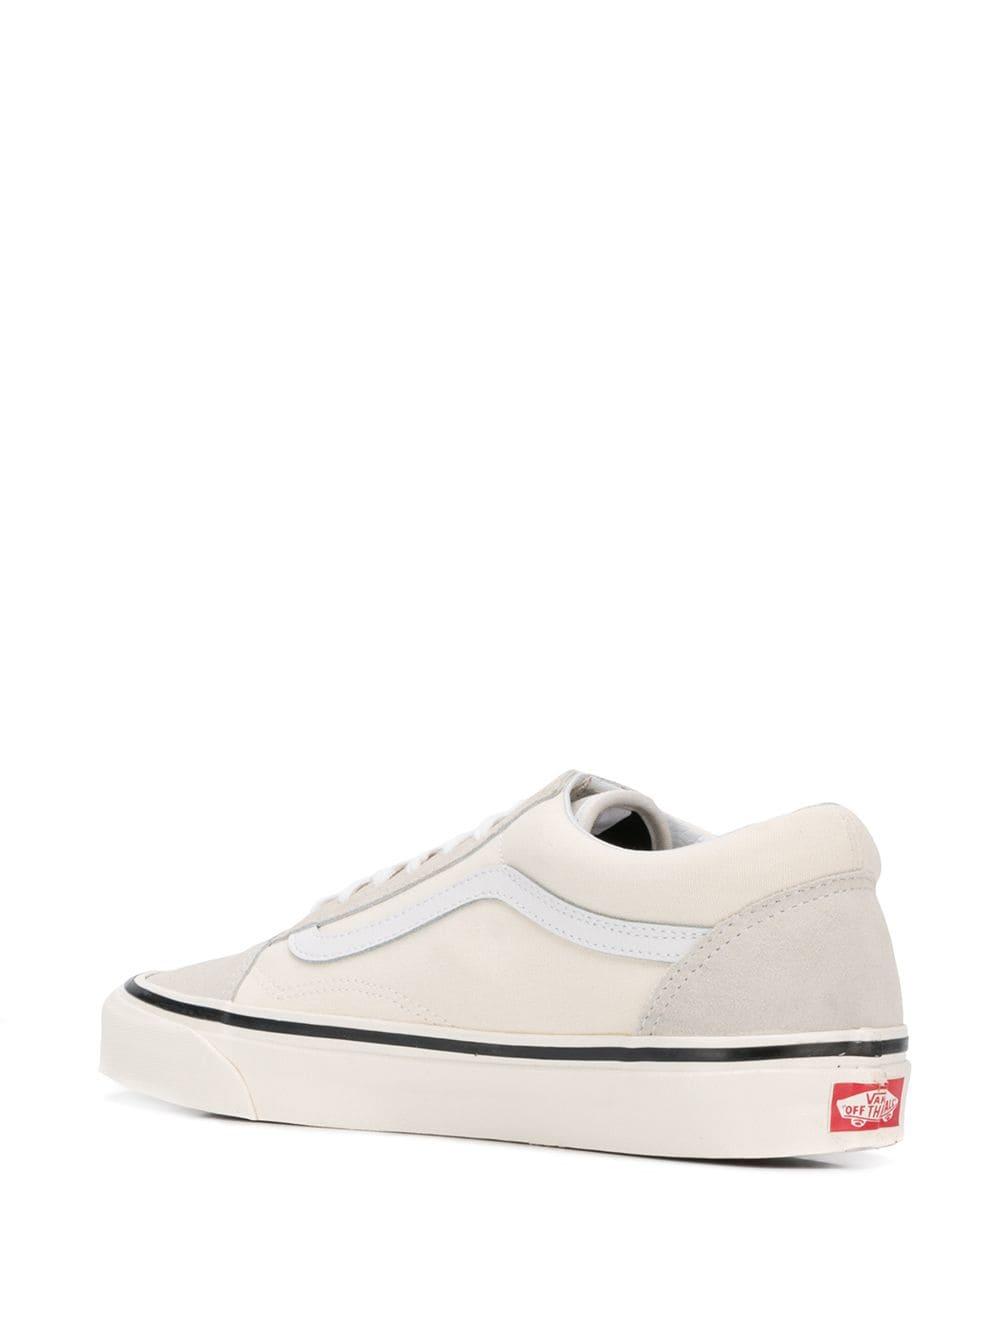 Vans Rubber Anaheim Old Skool 36 Dx Trainers in White - Save 19% | Lyst